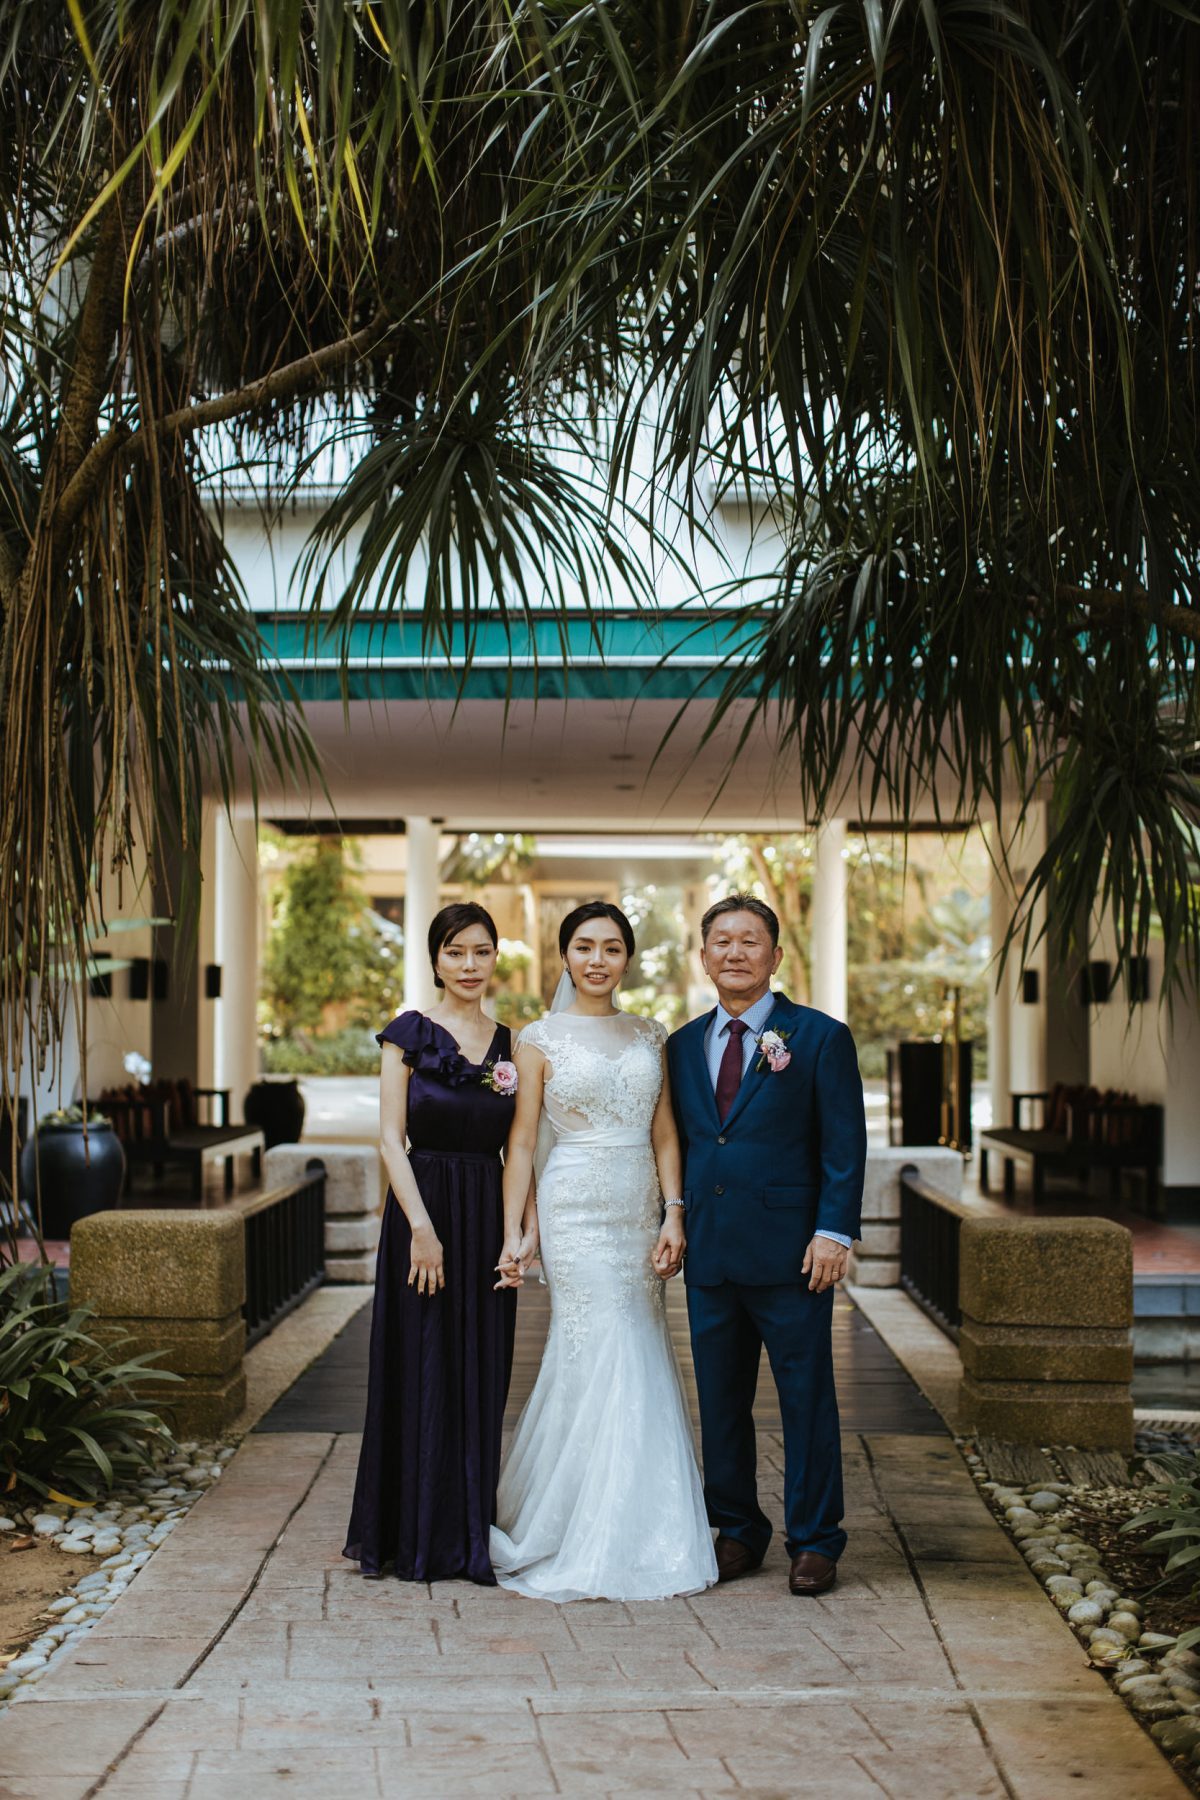 Garden Romantic Rustic Rosy Golden Wedding at The Saujana Hotel Subang Kuala Lumpur malaysia cliff choong the cross effects kevin tan destination portrait and wedding photographer malaysia kuala lumpur bride and groom couple kiss romantic intimate moment scene Parents and bride